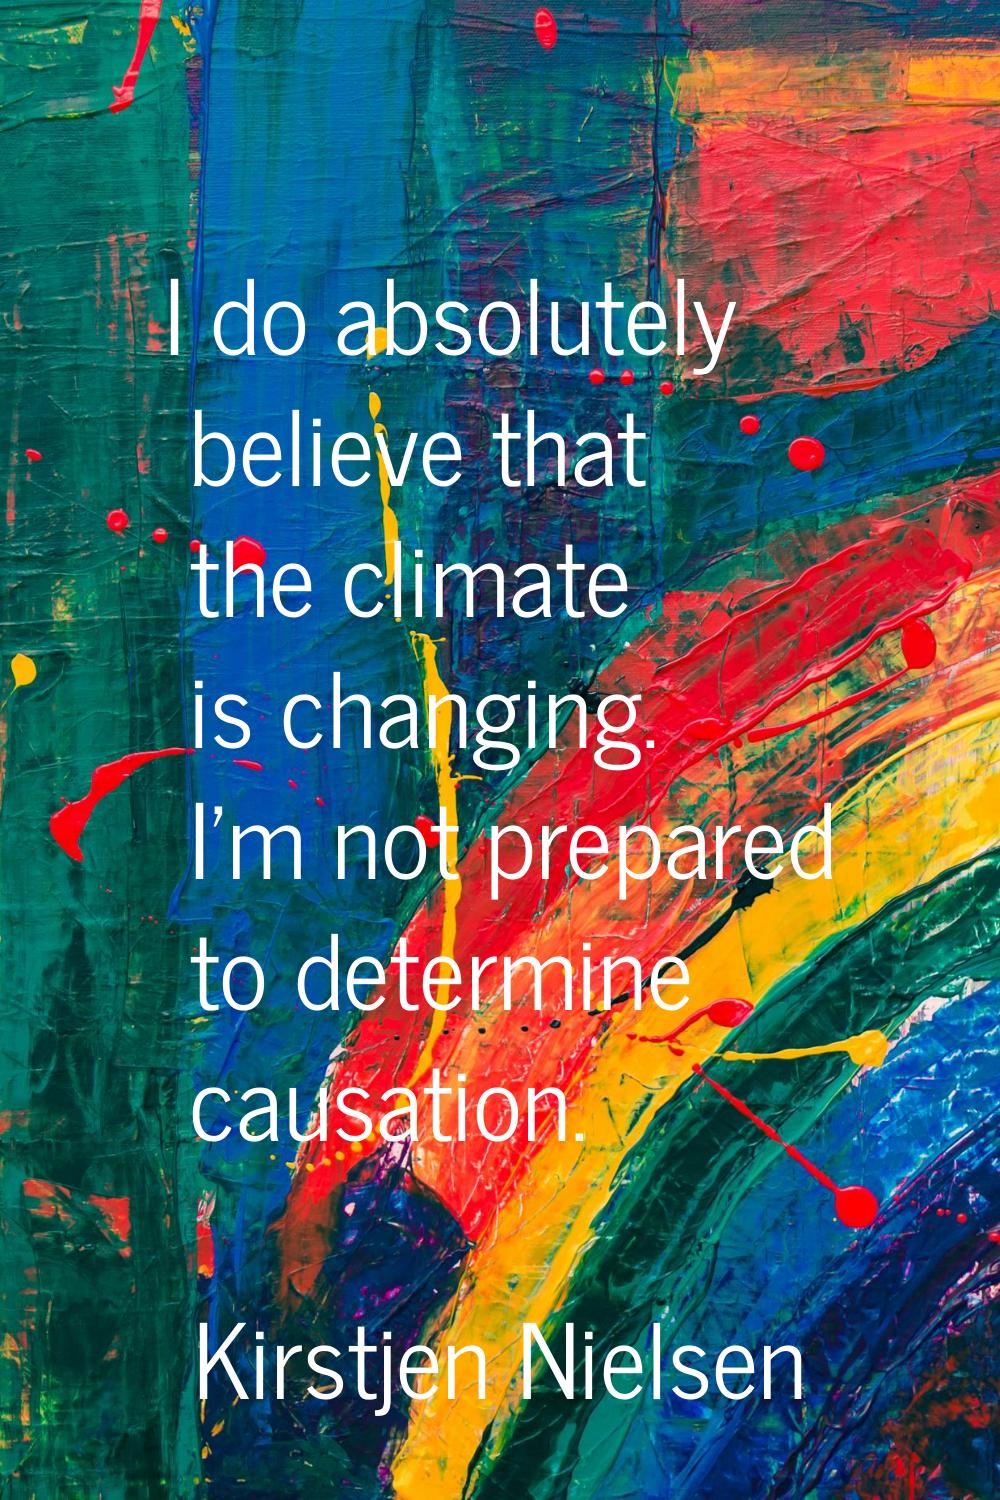 I do absolutely believe that the climate is changing. I'm not prepared to determine causation.